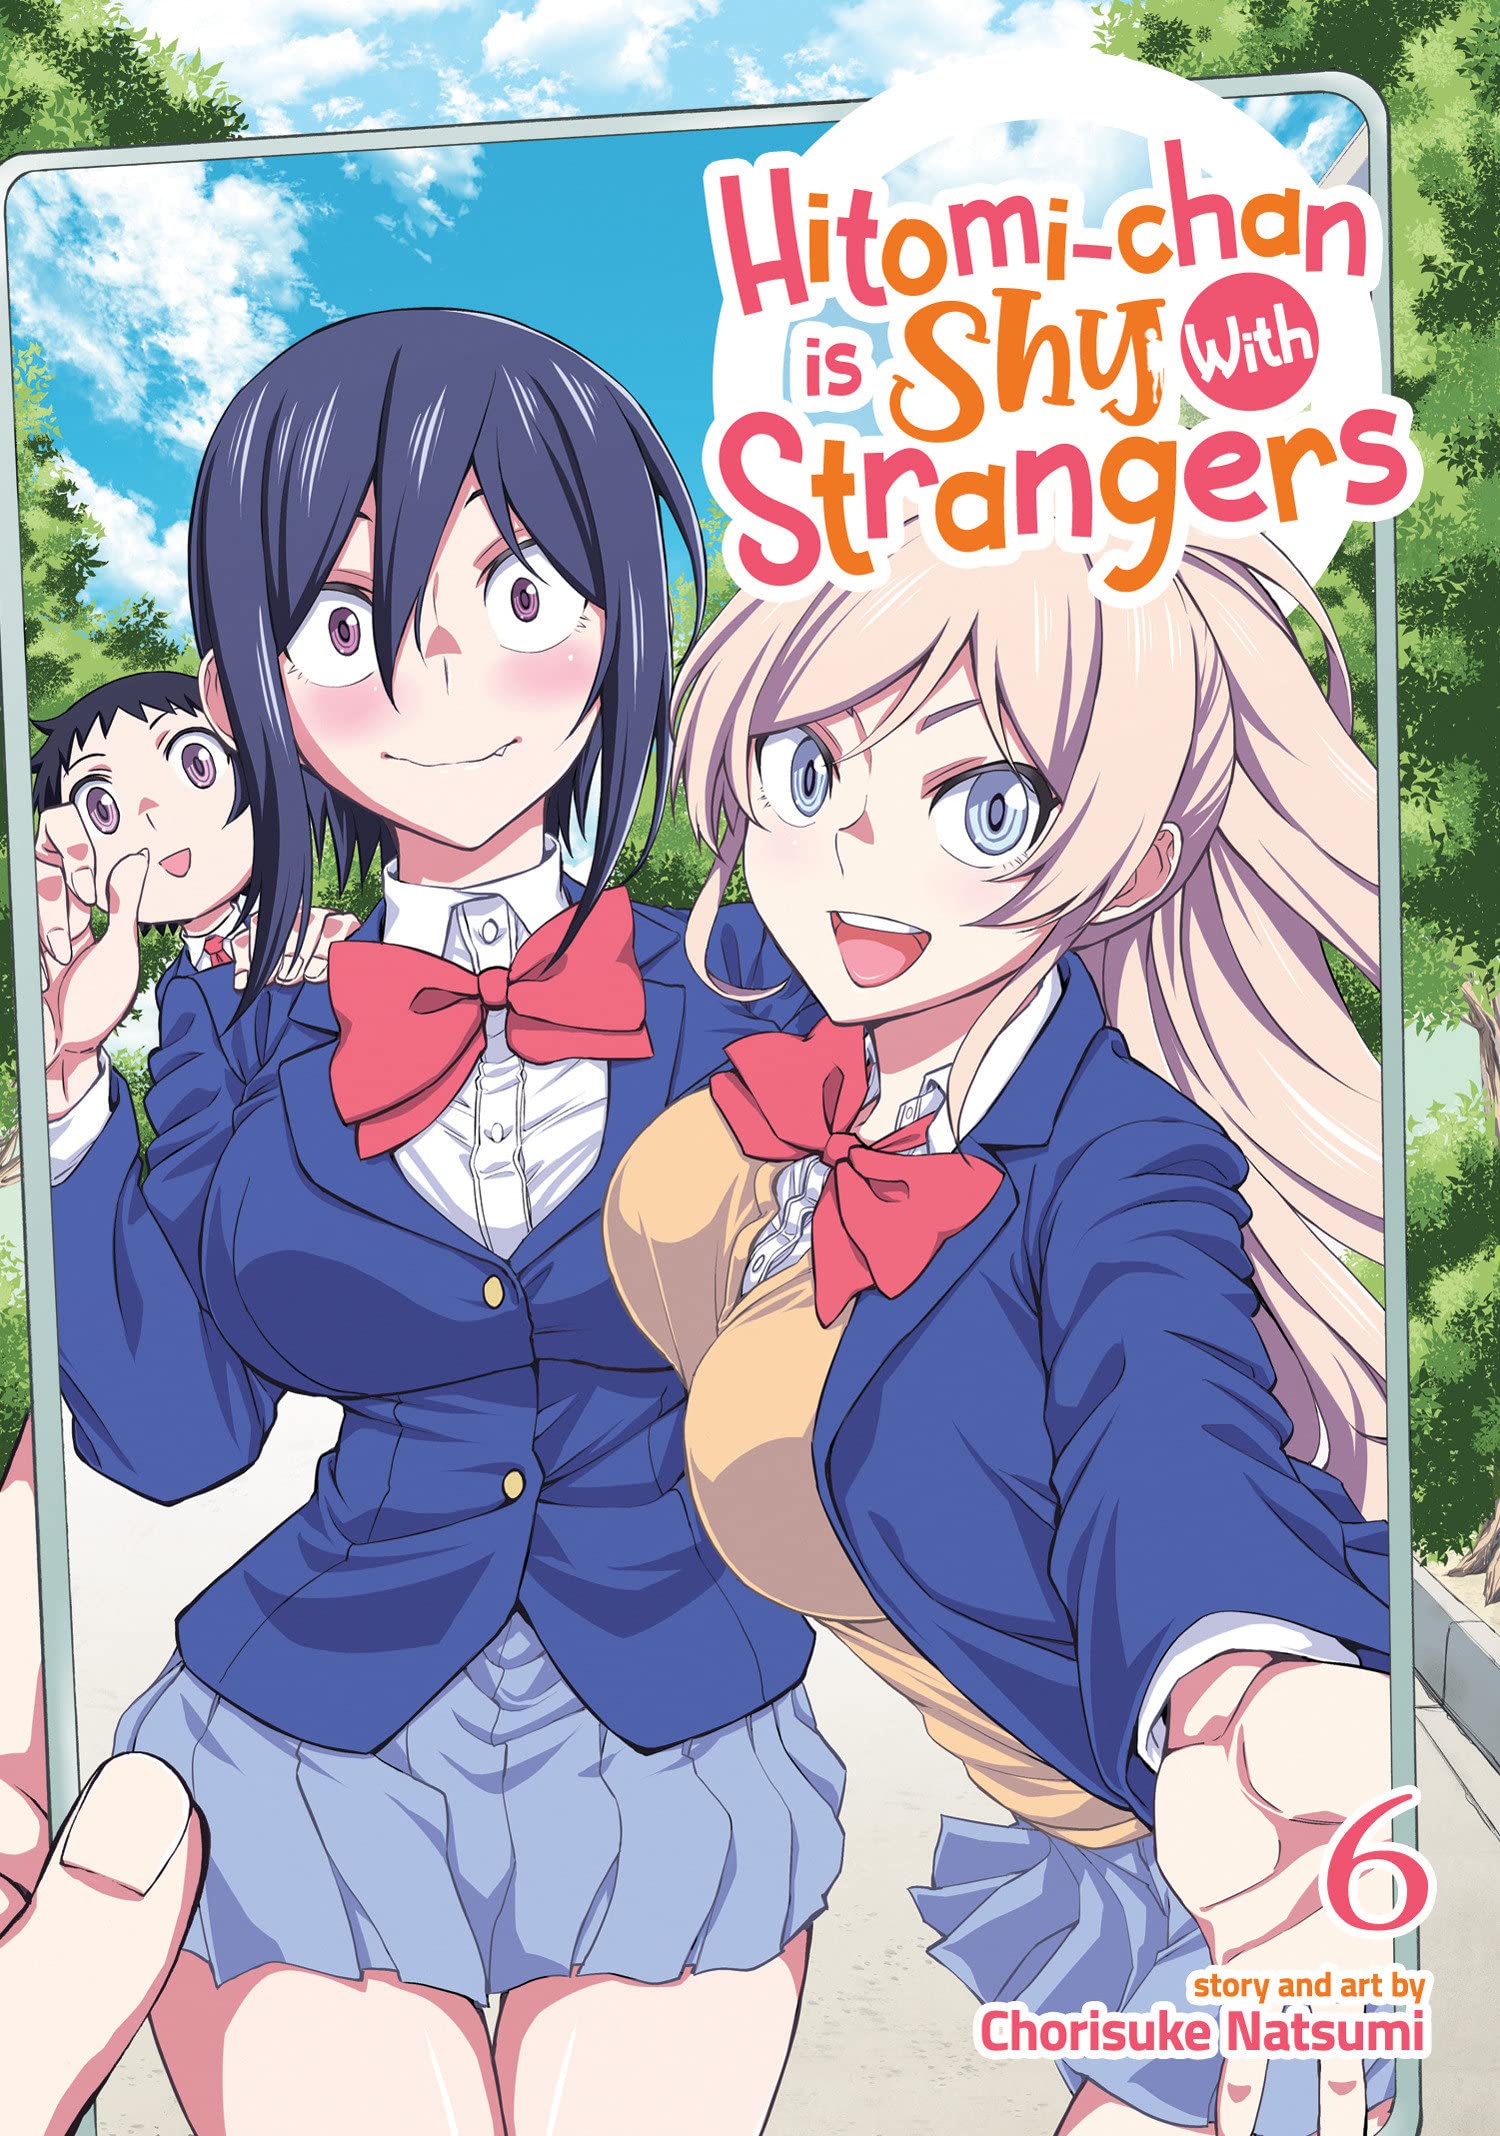 Hitomi-chan is Shy With Strangers Vol. 06